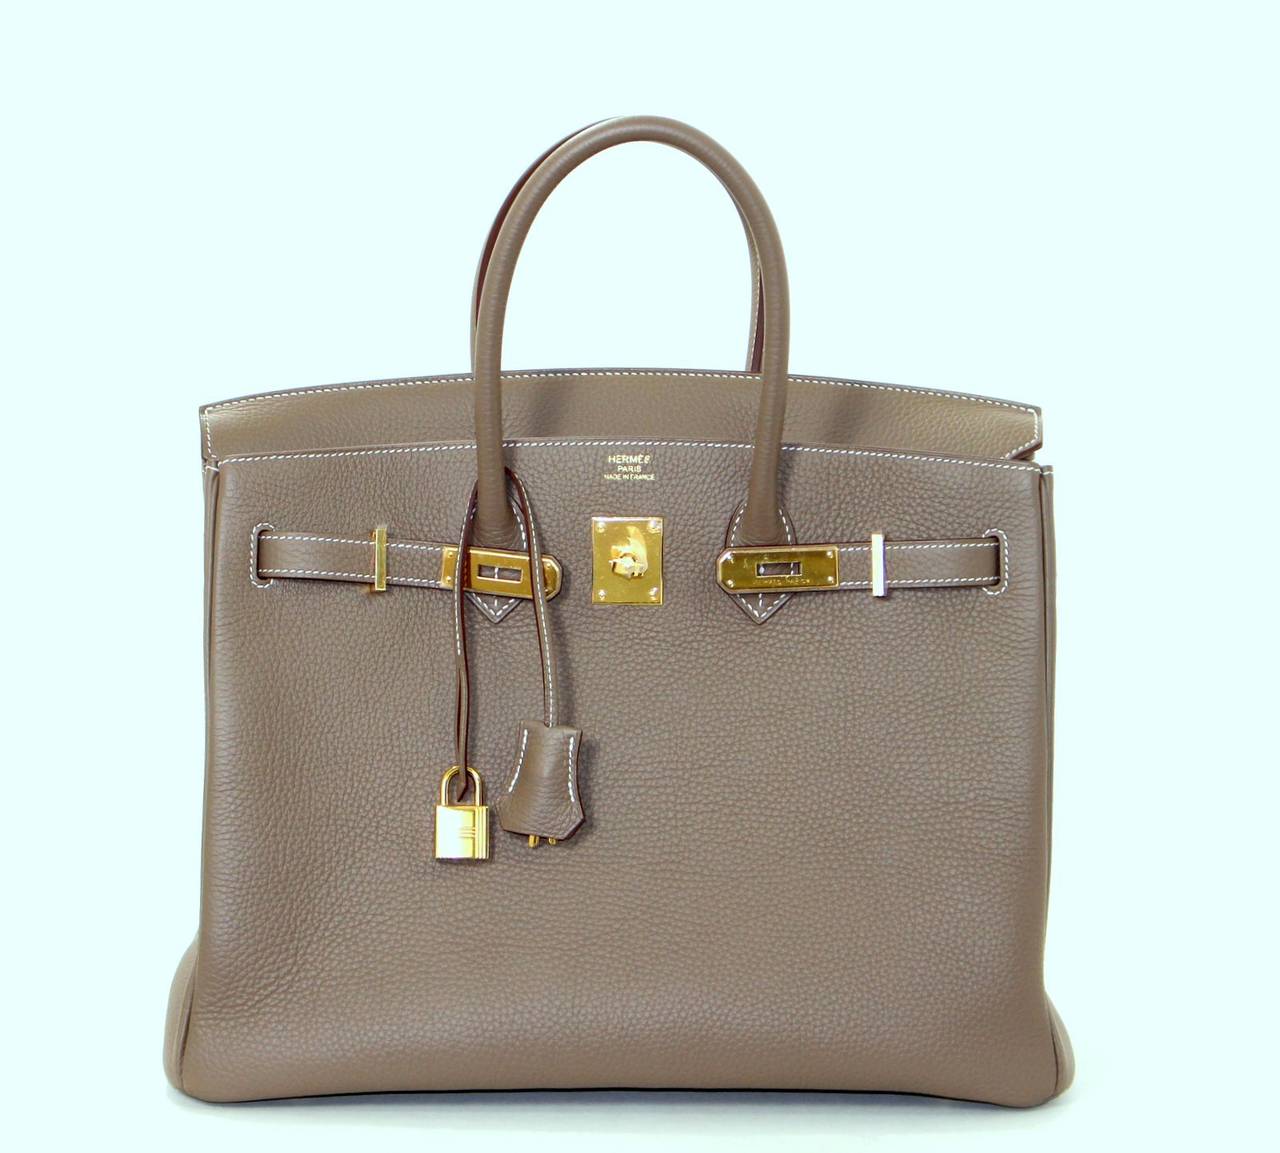 HERMES Etoupe Clemence Birkin Bag- Taupe Color with Gold HW 35 cm at 1stdibs